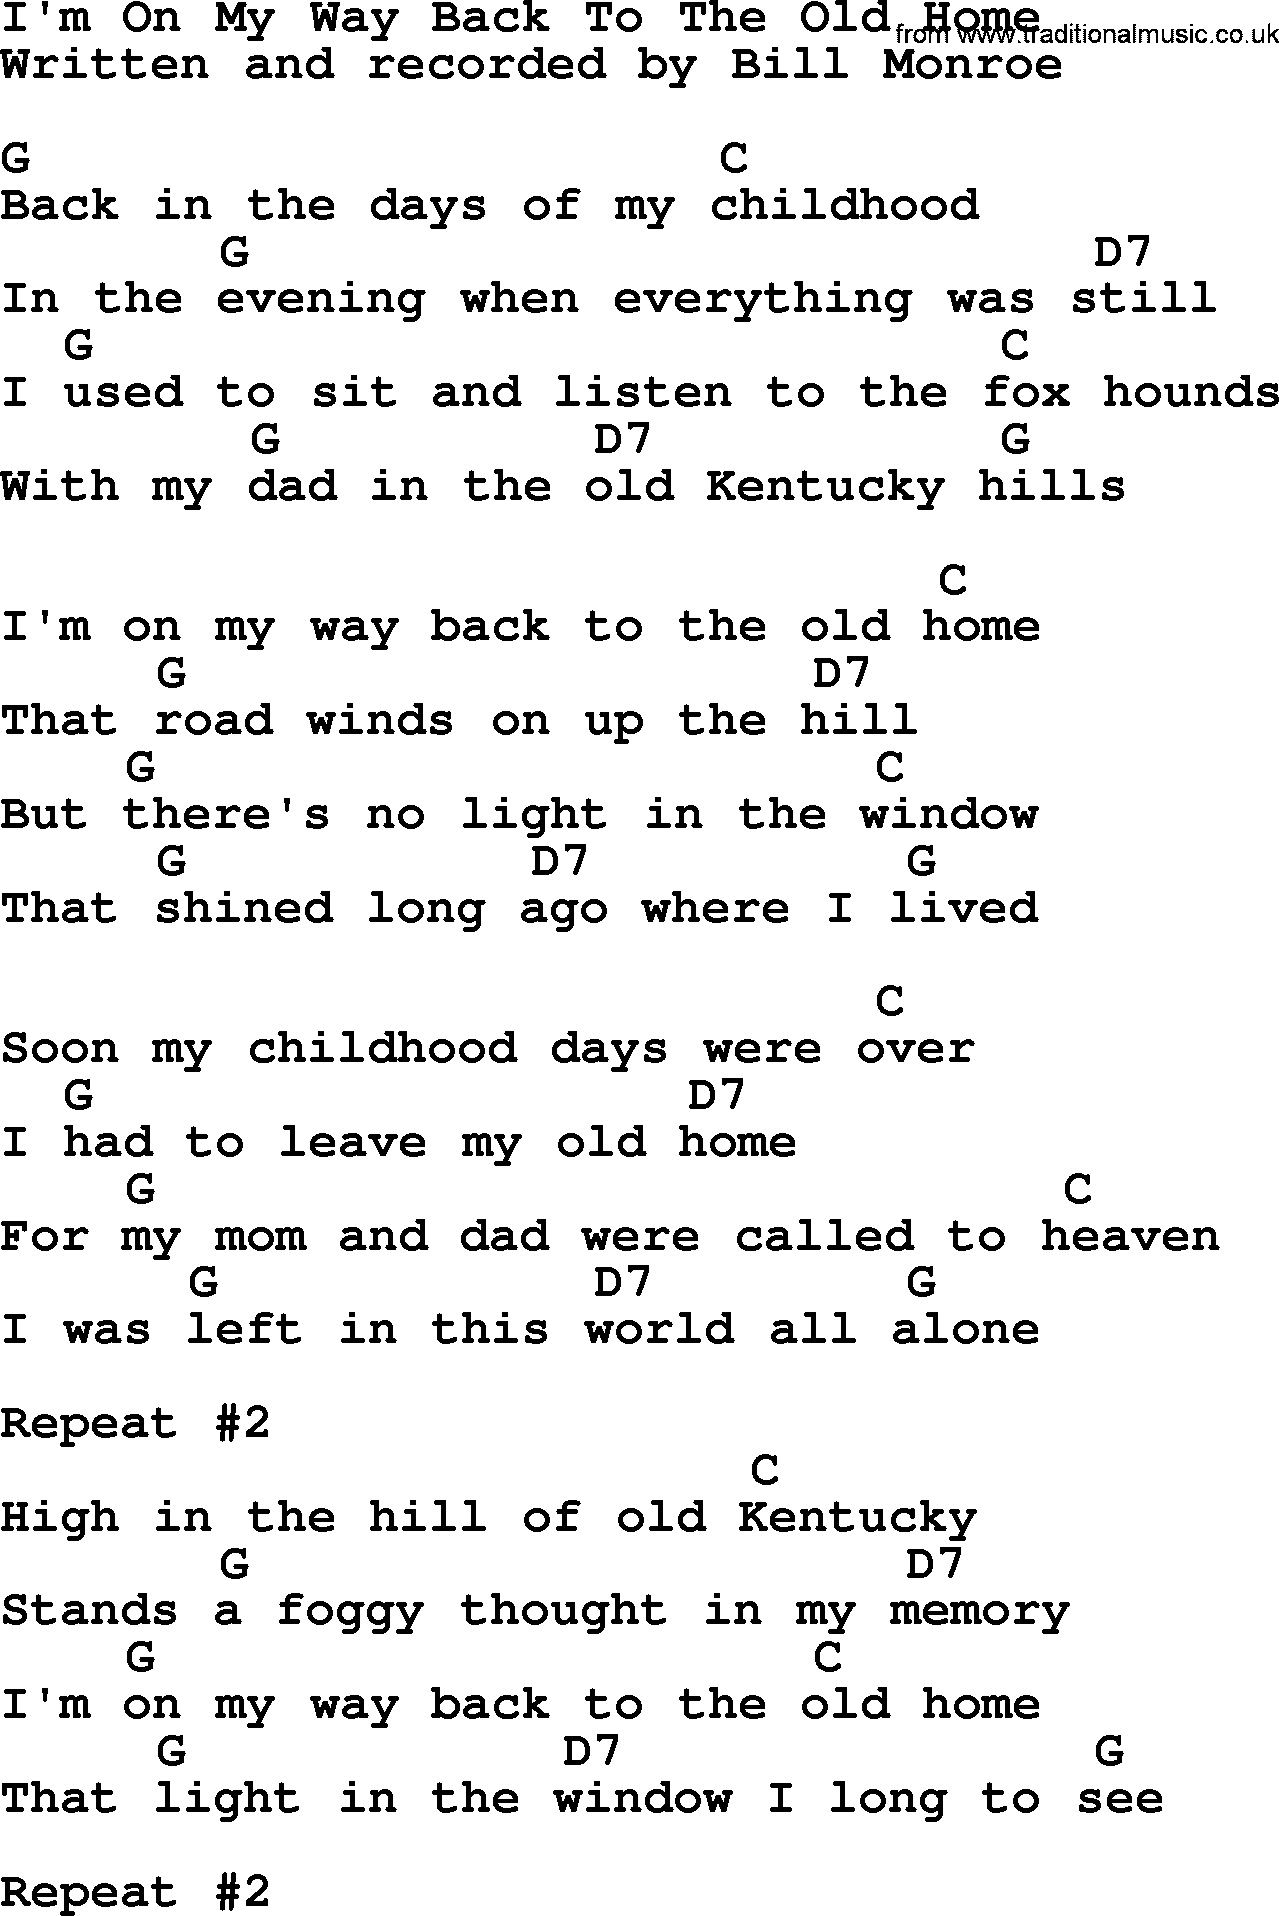 Bluegrass song: I'm On My Way Back To The Old Home, lyrics and chords